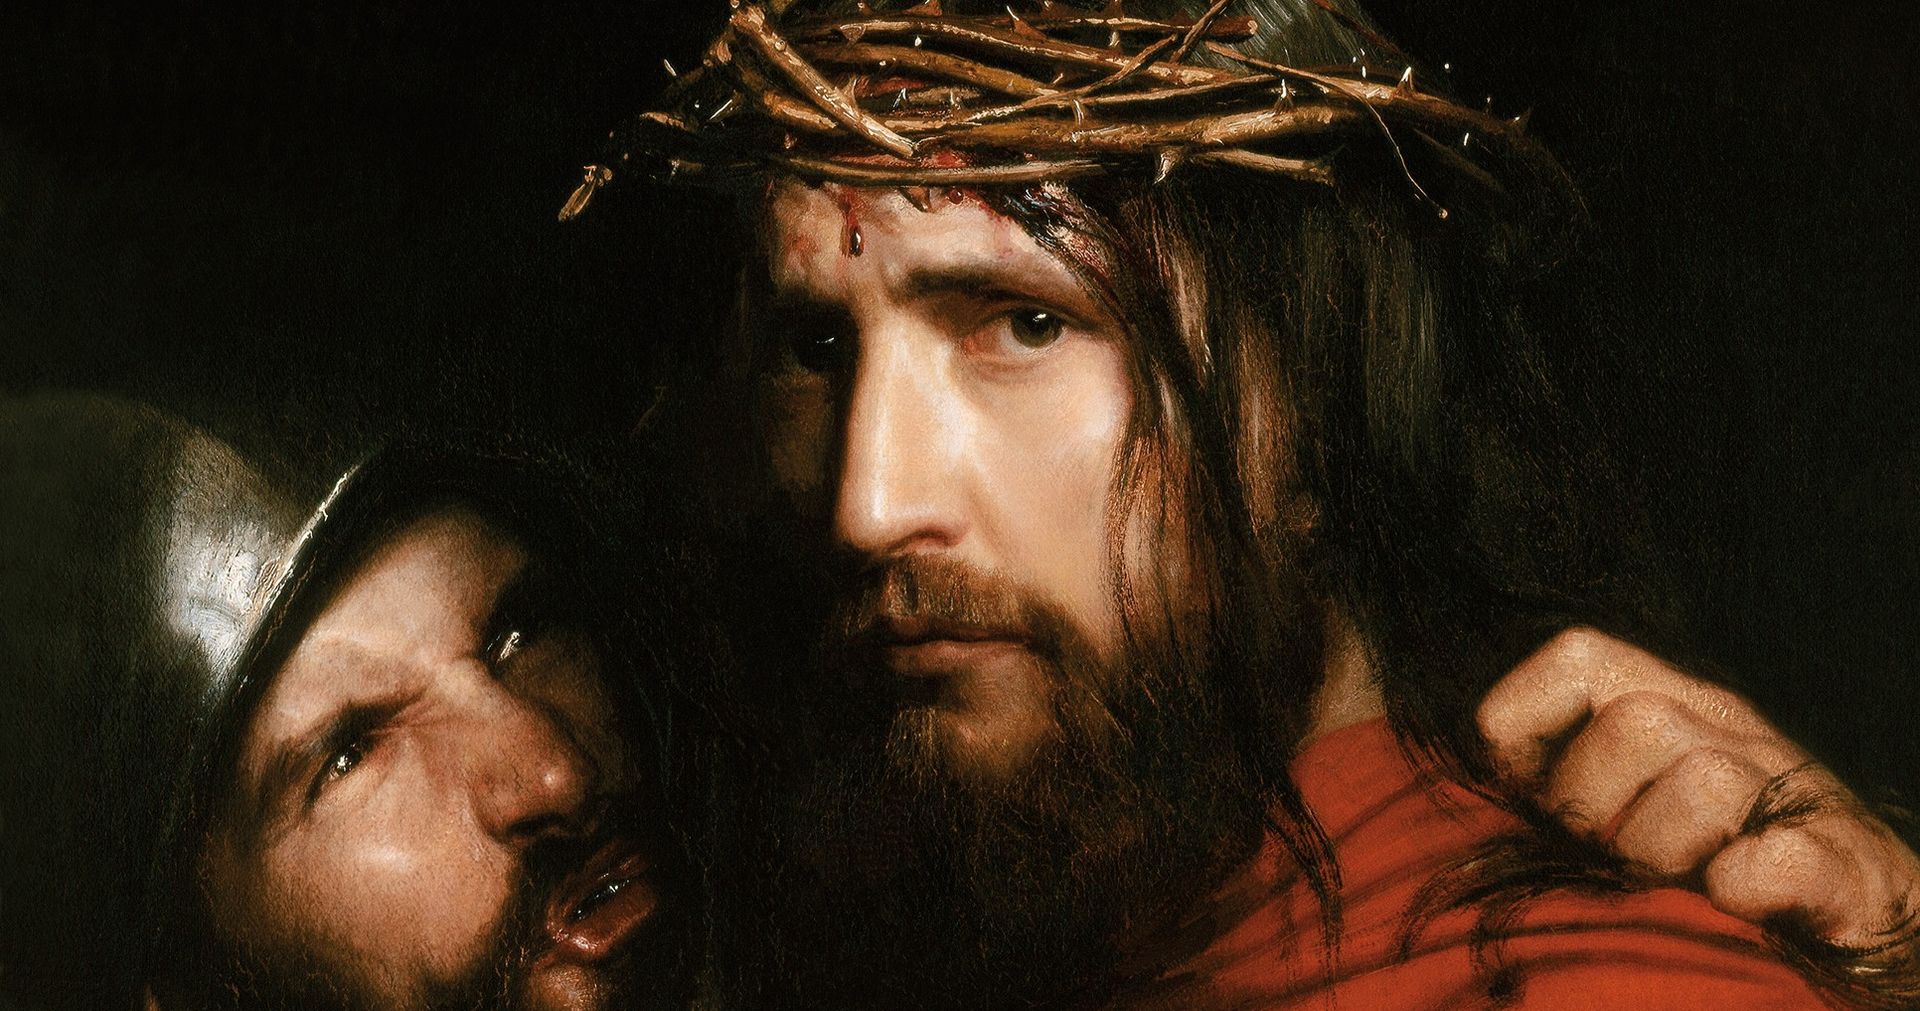 Jesus Christ wearing a crown of thorns with a Roman soldier mocking him.